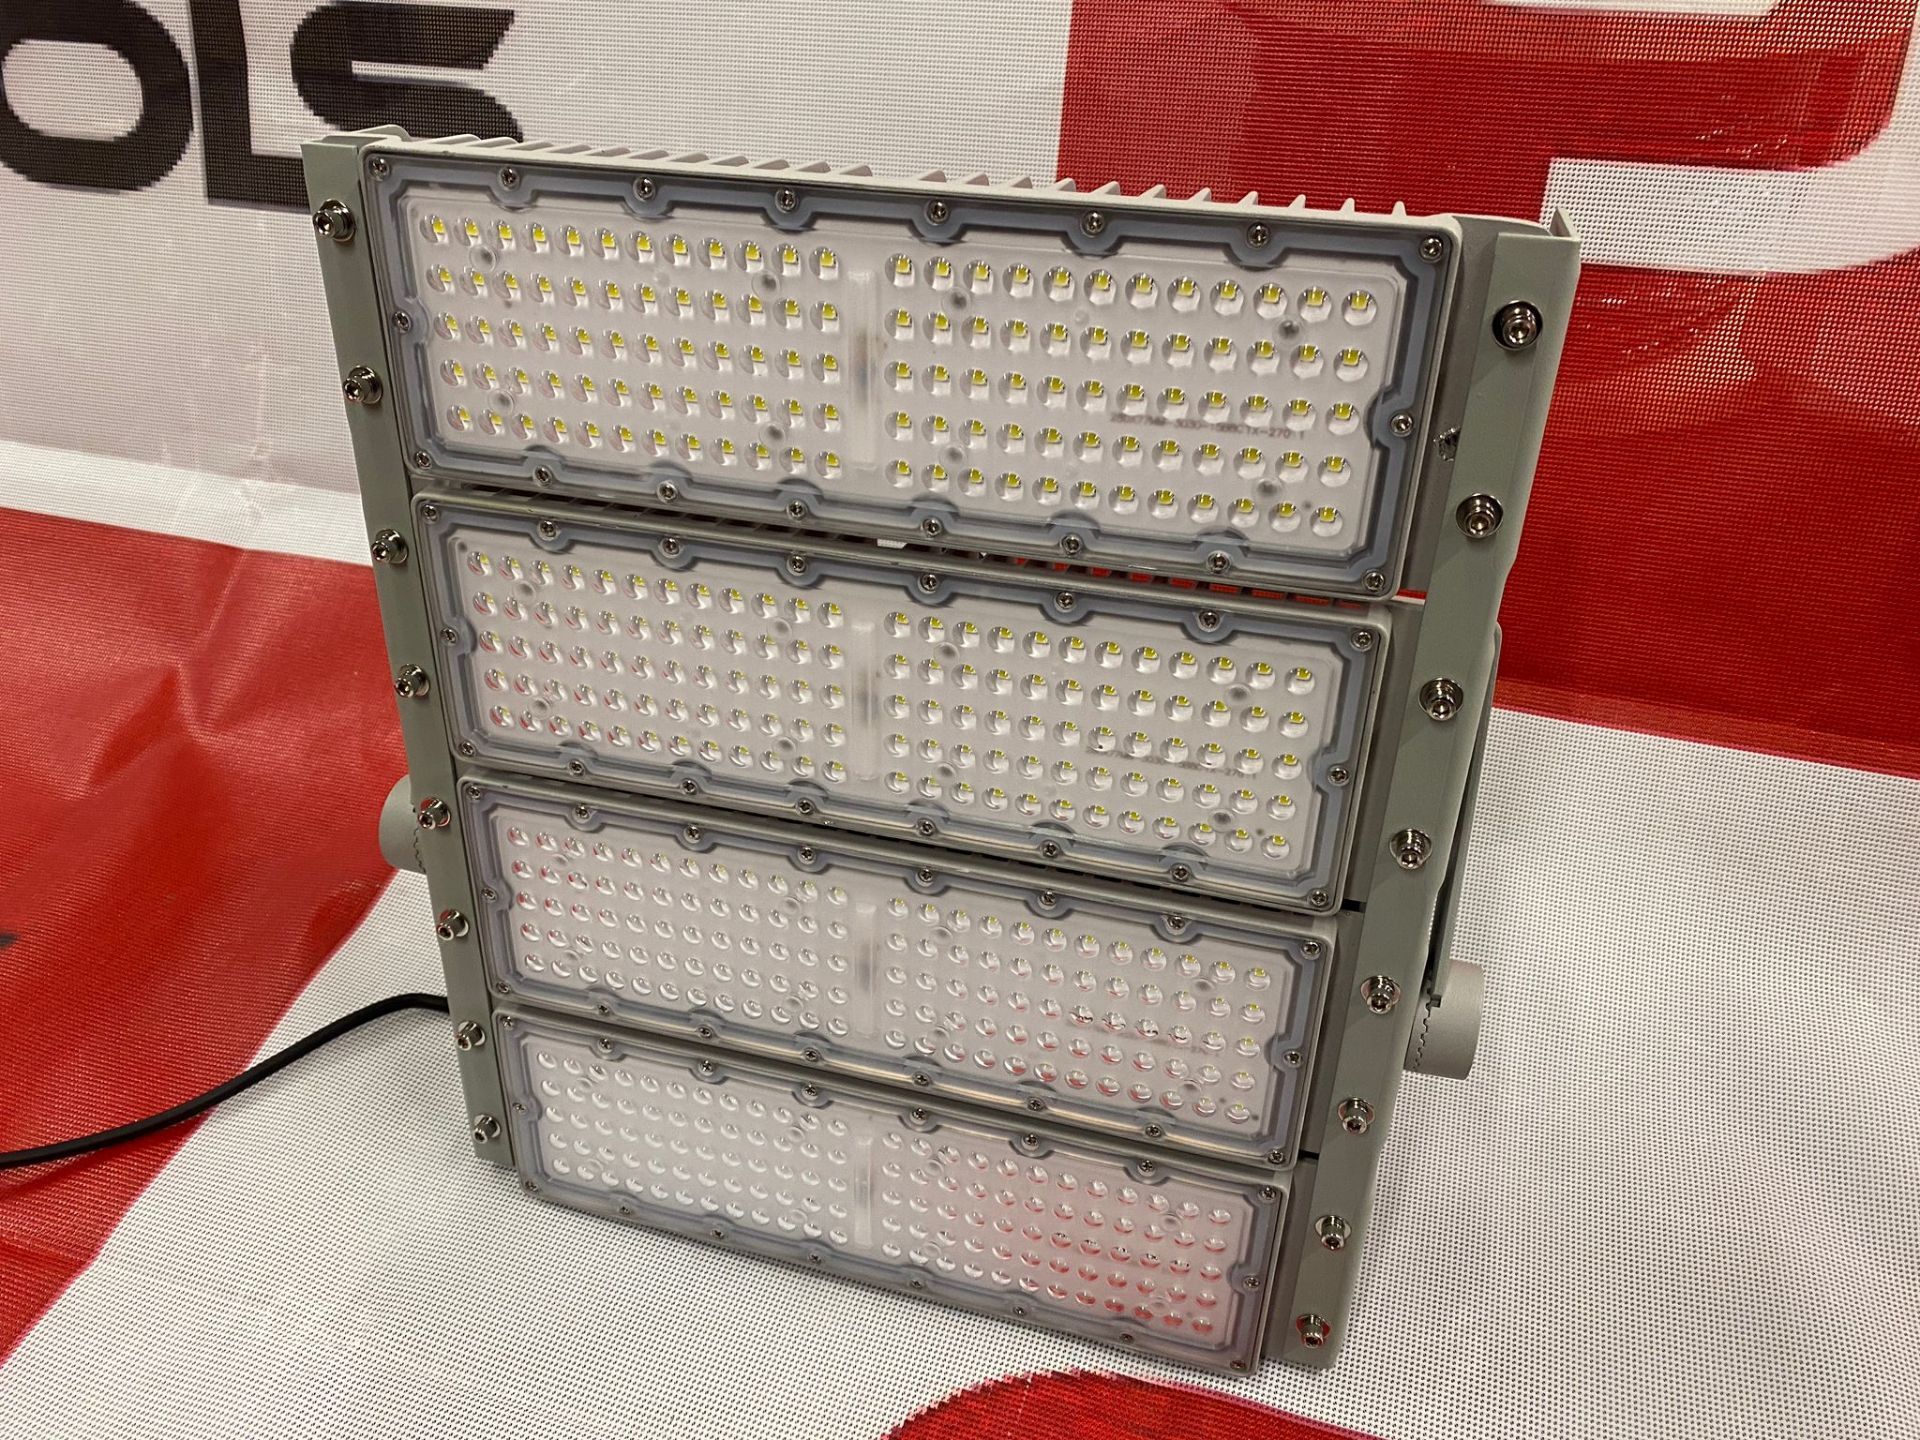 3 x LED400 Watt Flood Light Panel - For Car Parks, Security, Playing fields, Football pitches etc